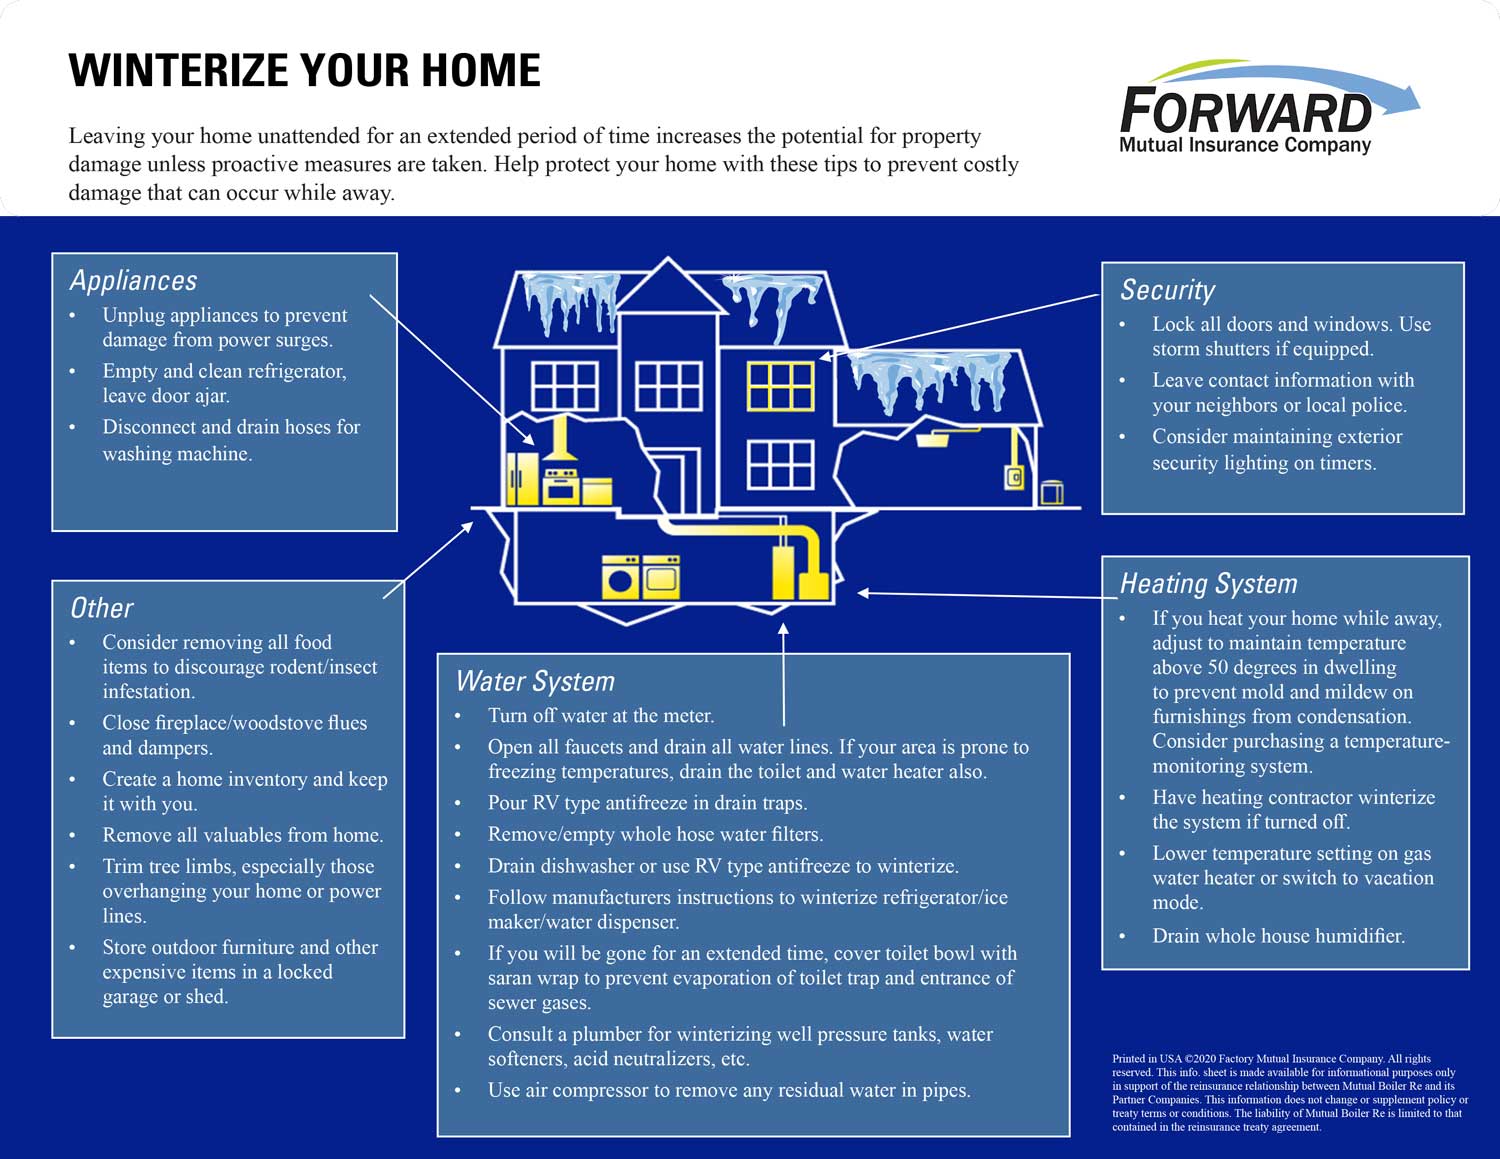 Home Maintenance Tips for Winter, Forward Mutual